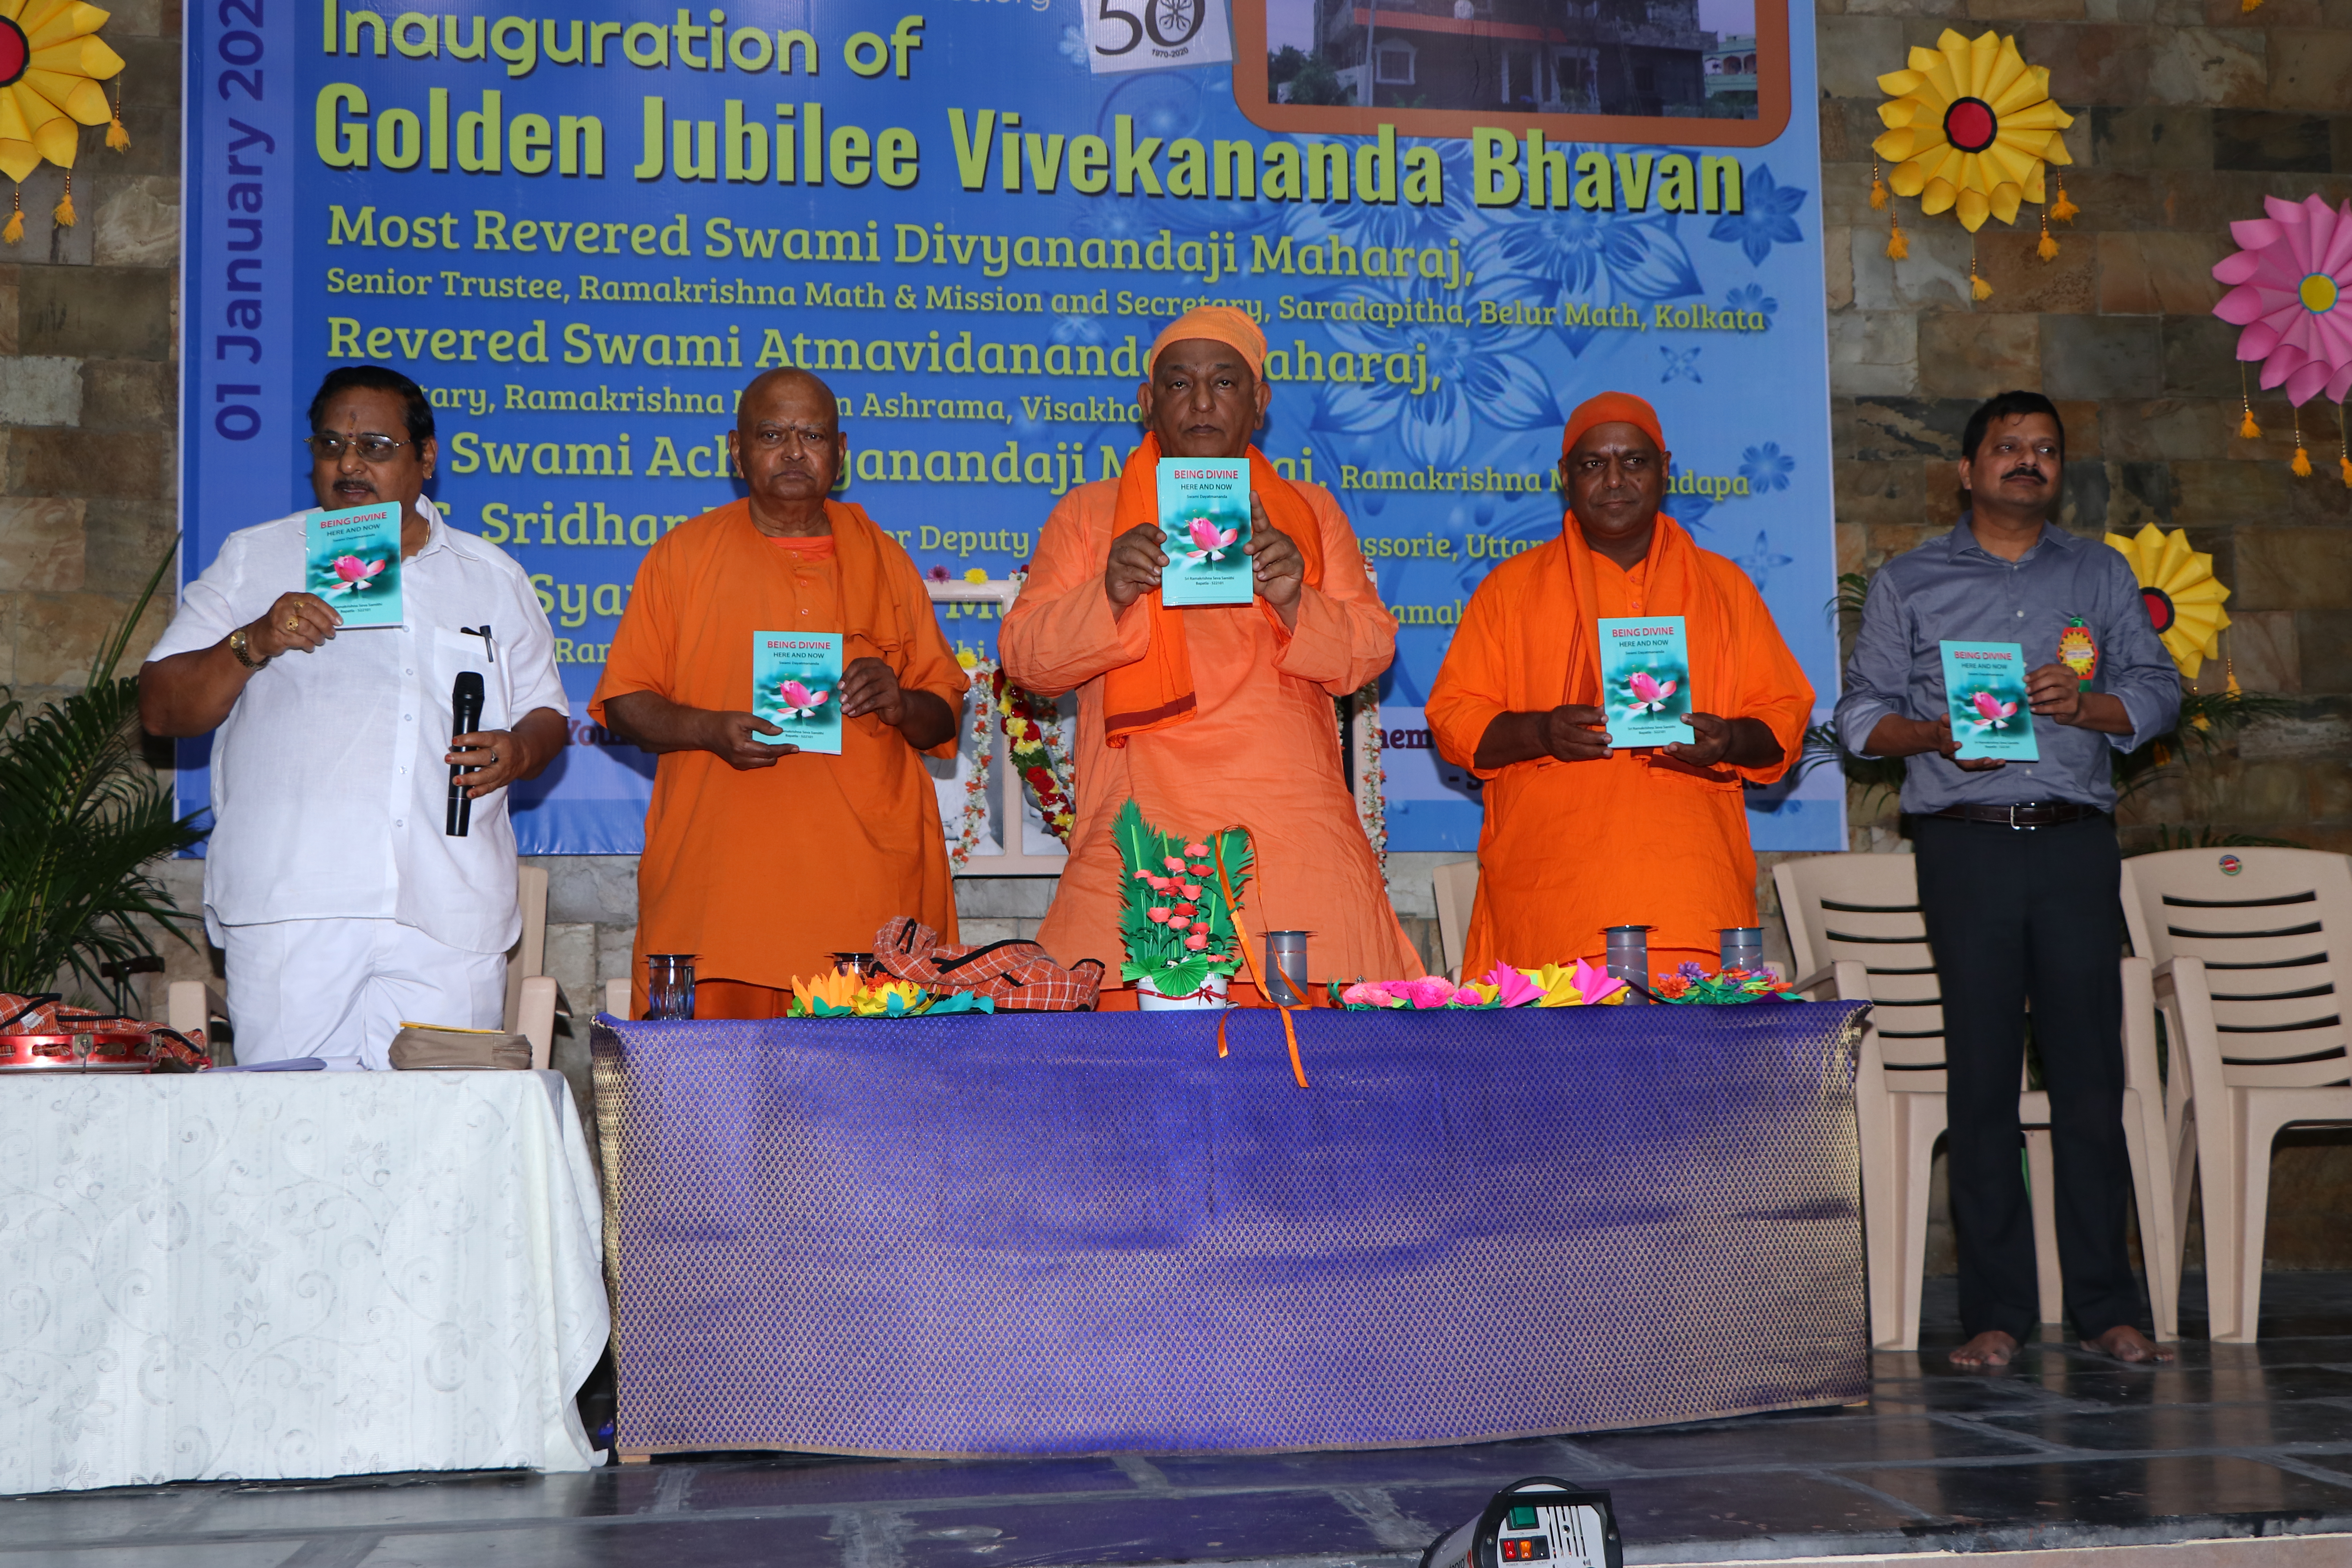 Inauguration of the new publication "Being Divine - Here and Now" written by Rev. Swami Dayatmanandaji Maharaj.